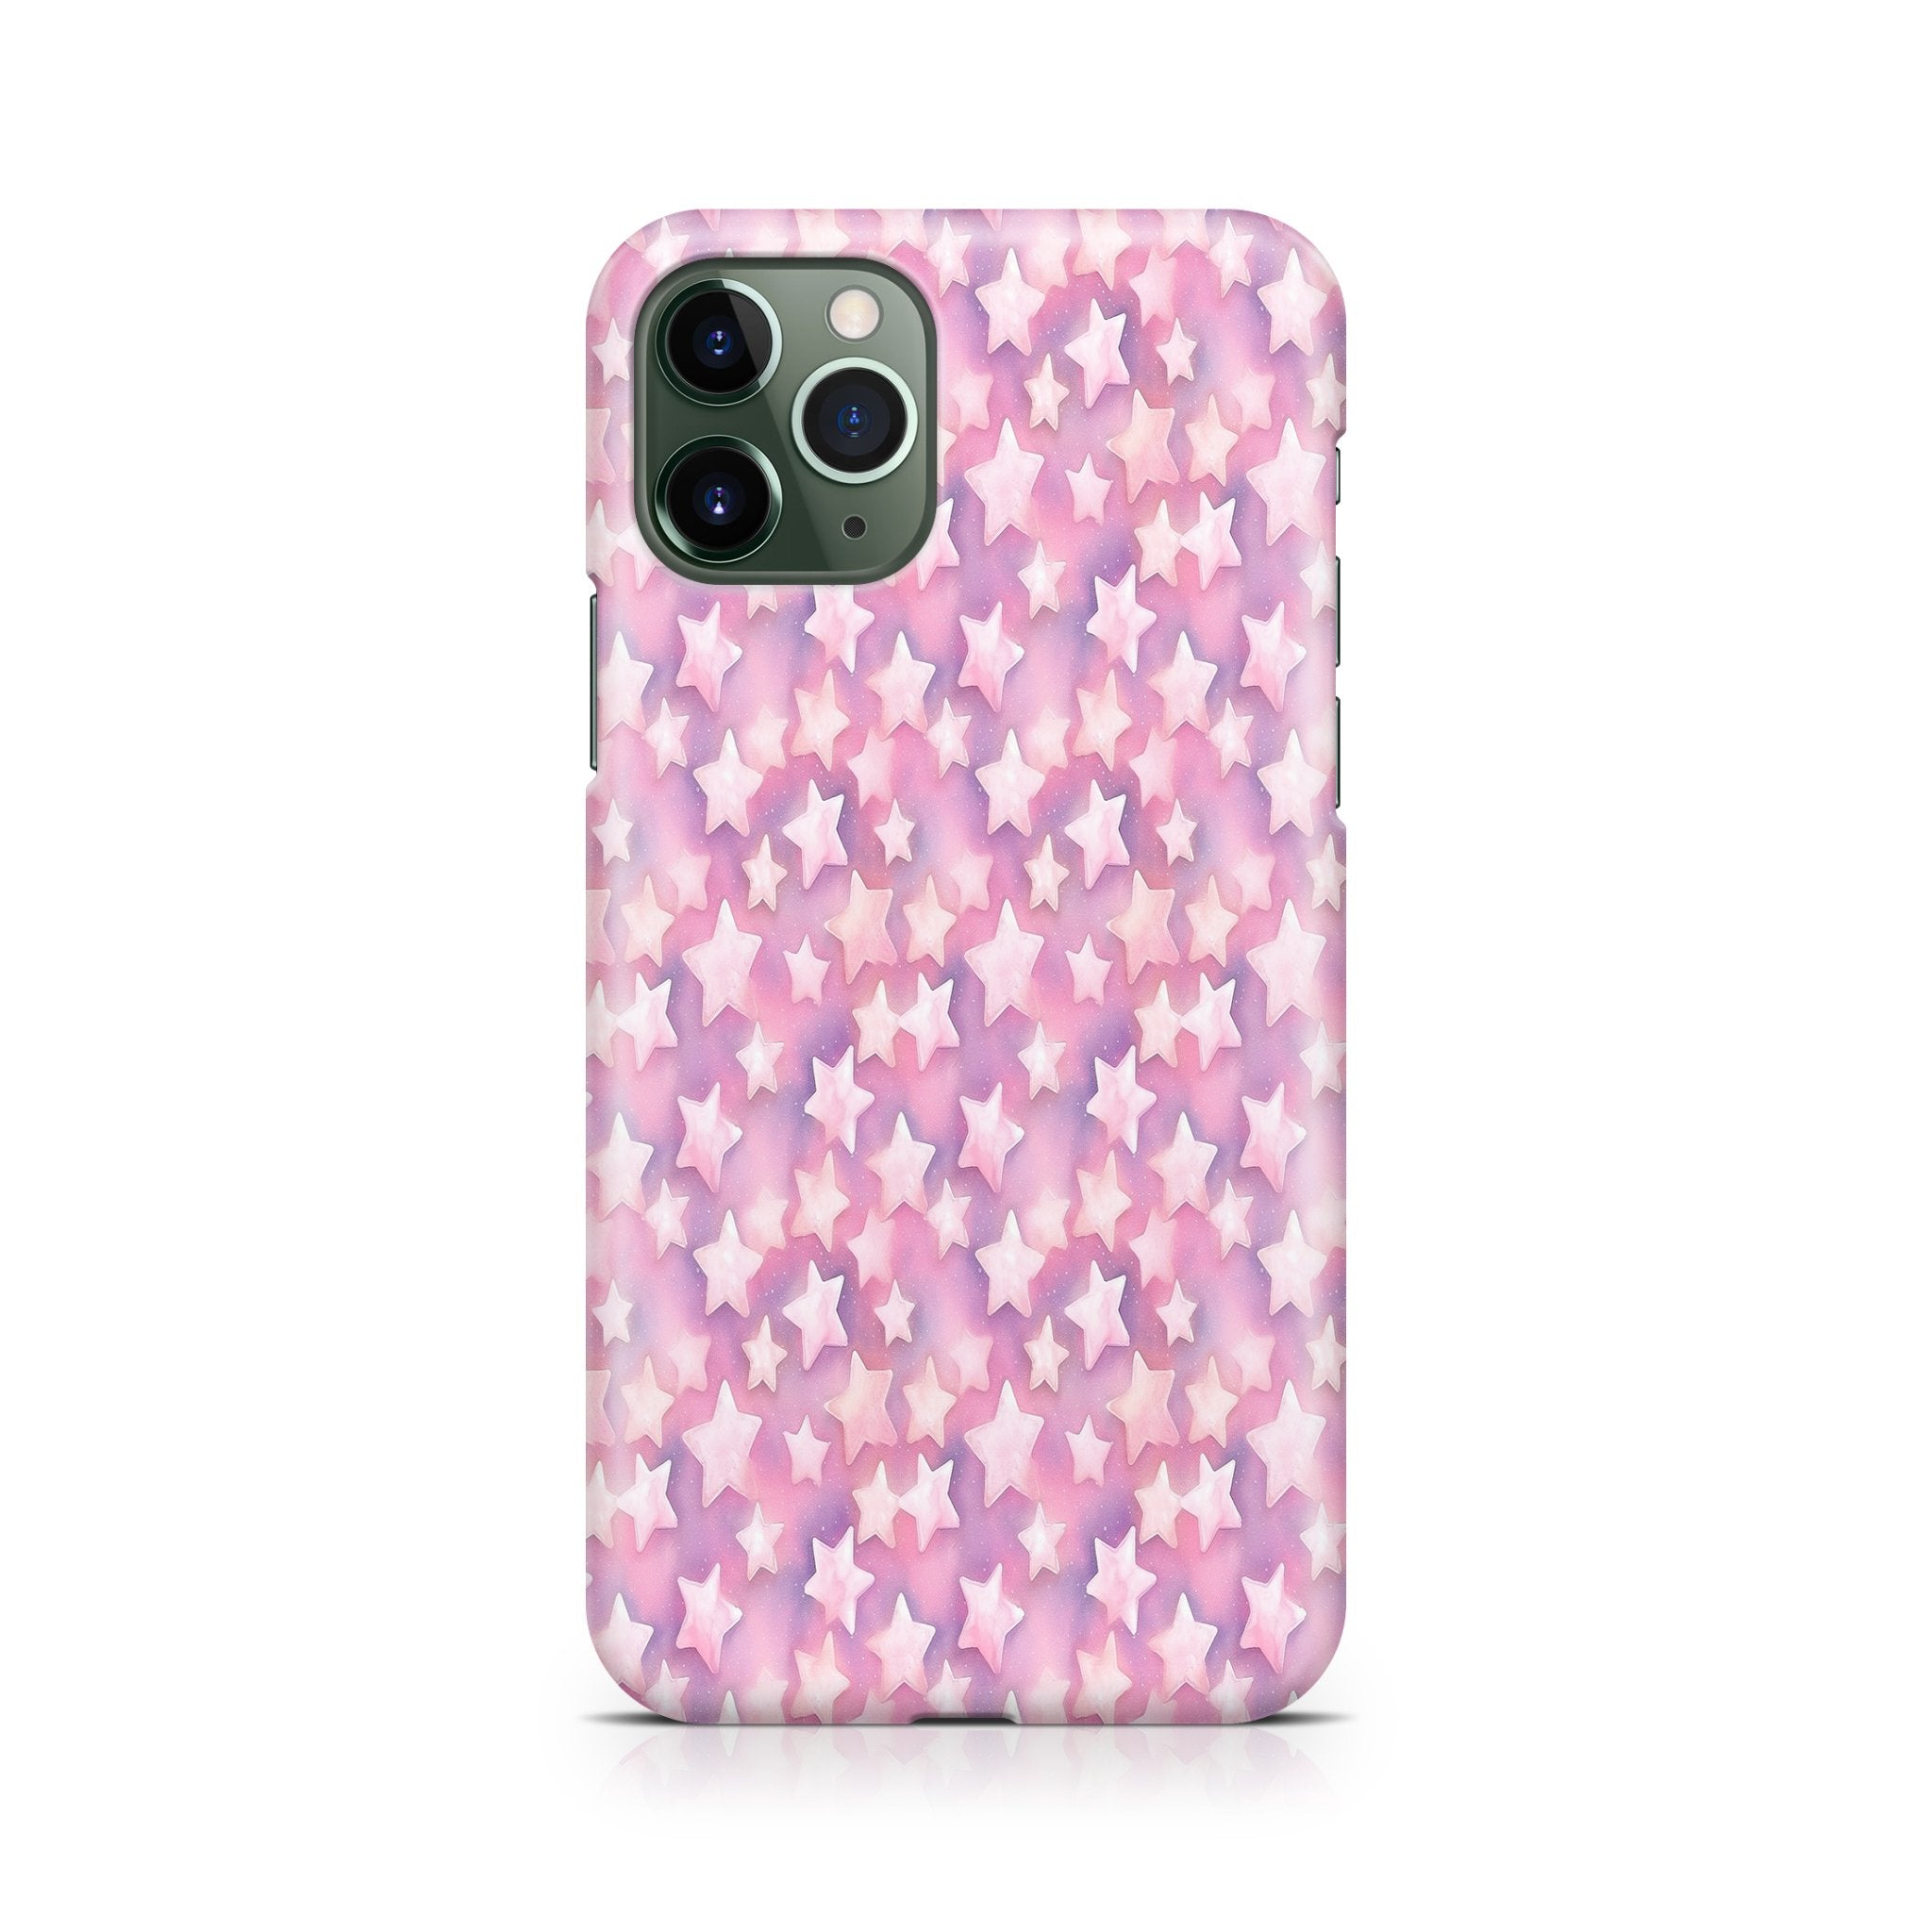 Dreamer Pink - iPhone phone case designs by CaseSwagger